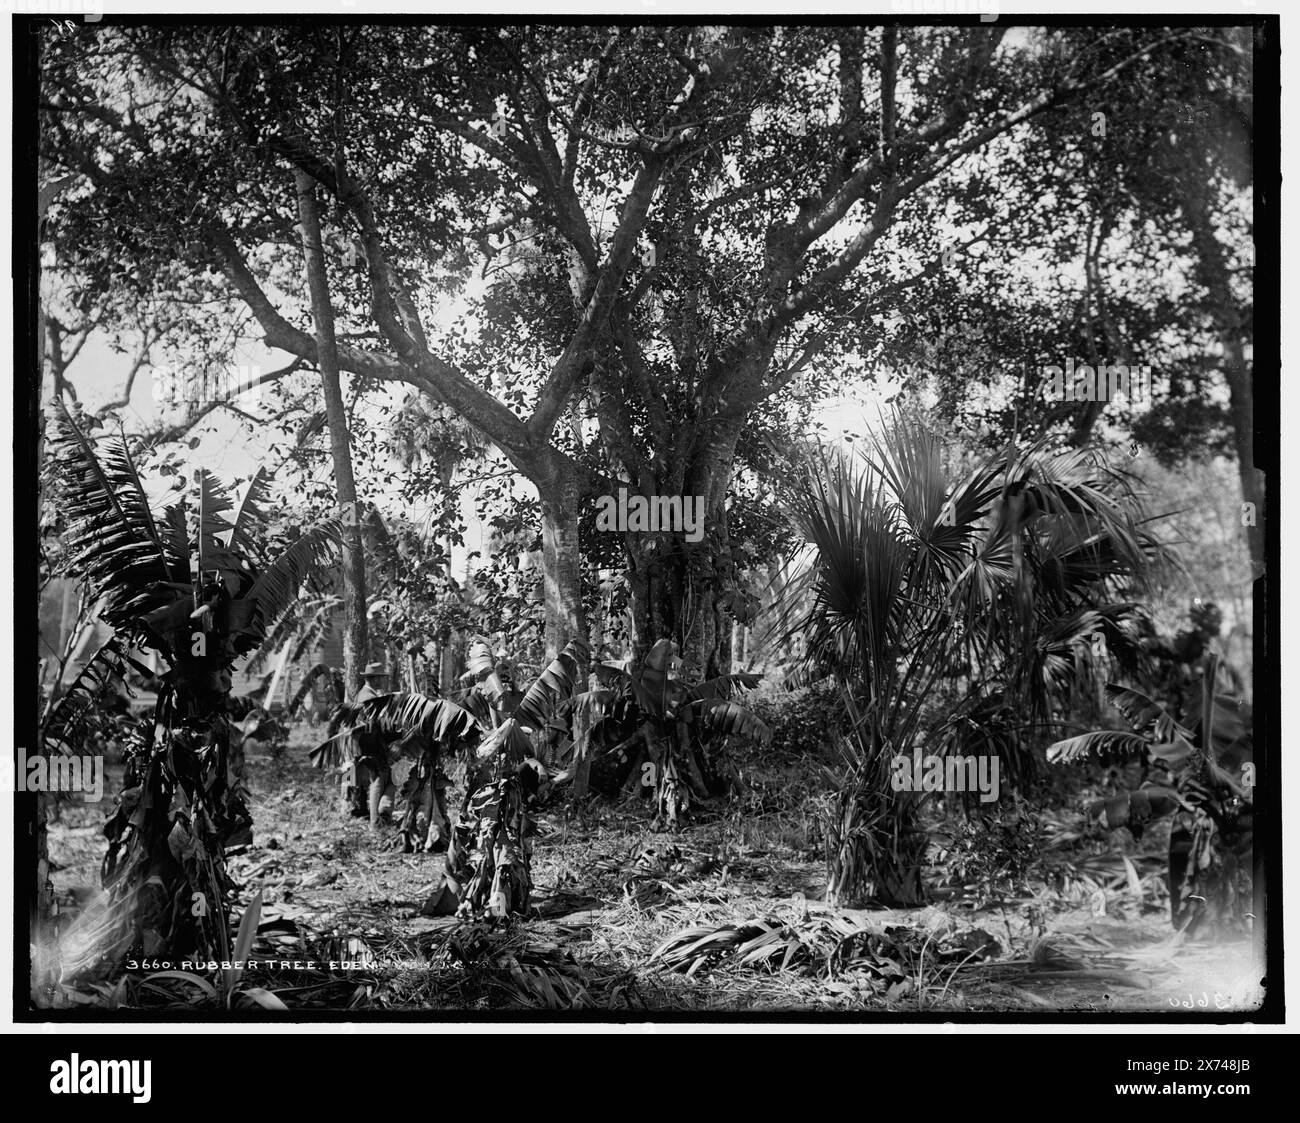 Rubber tree, Eden, '98' and 'W.H.J. & Co.' on negative., Detroit Publishing Co. no. 3660., Gift; State Historical Society of Colorado; 1949., Unverified information in this record. 752 field,  Rubber trees. , Bays. , United States, Florida, Indian River. , United States, Florida, Eden. Stock Photo